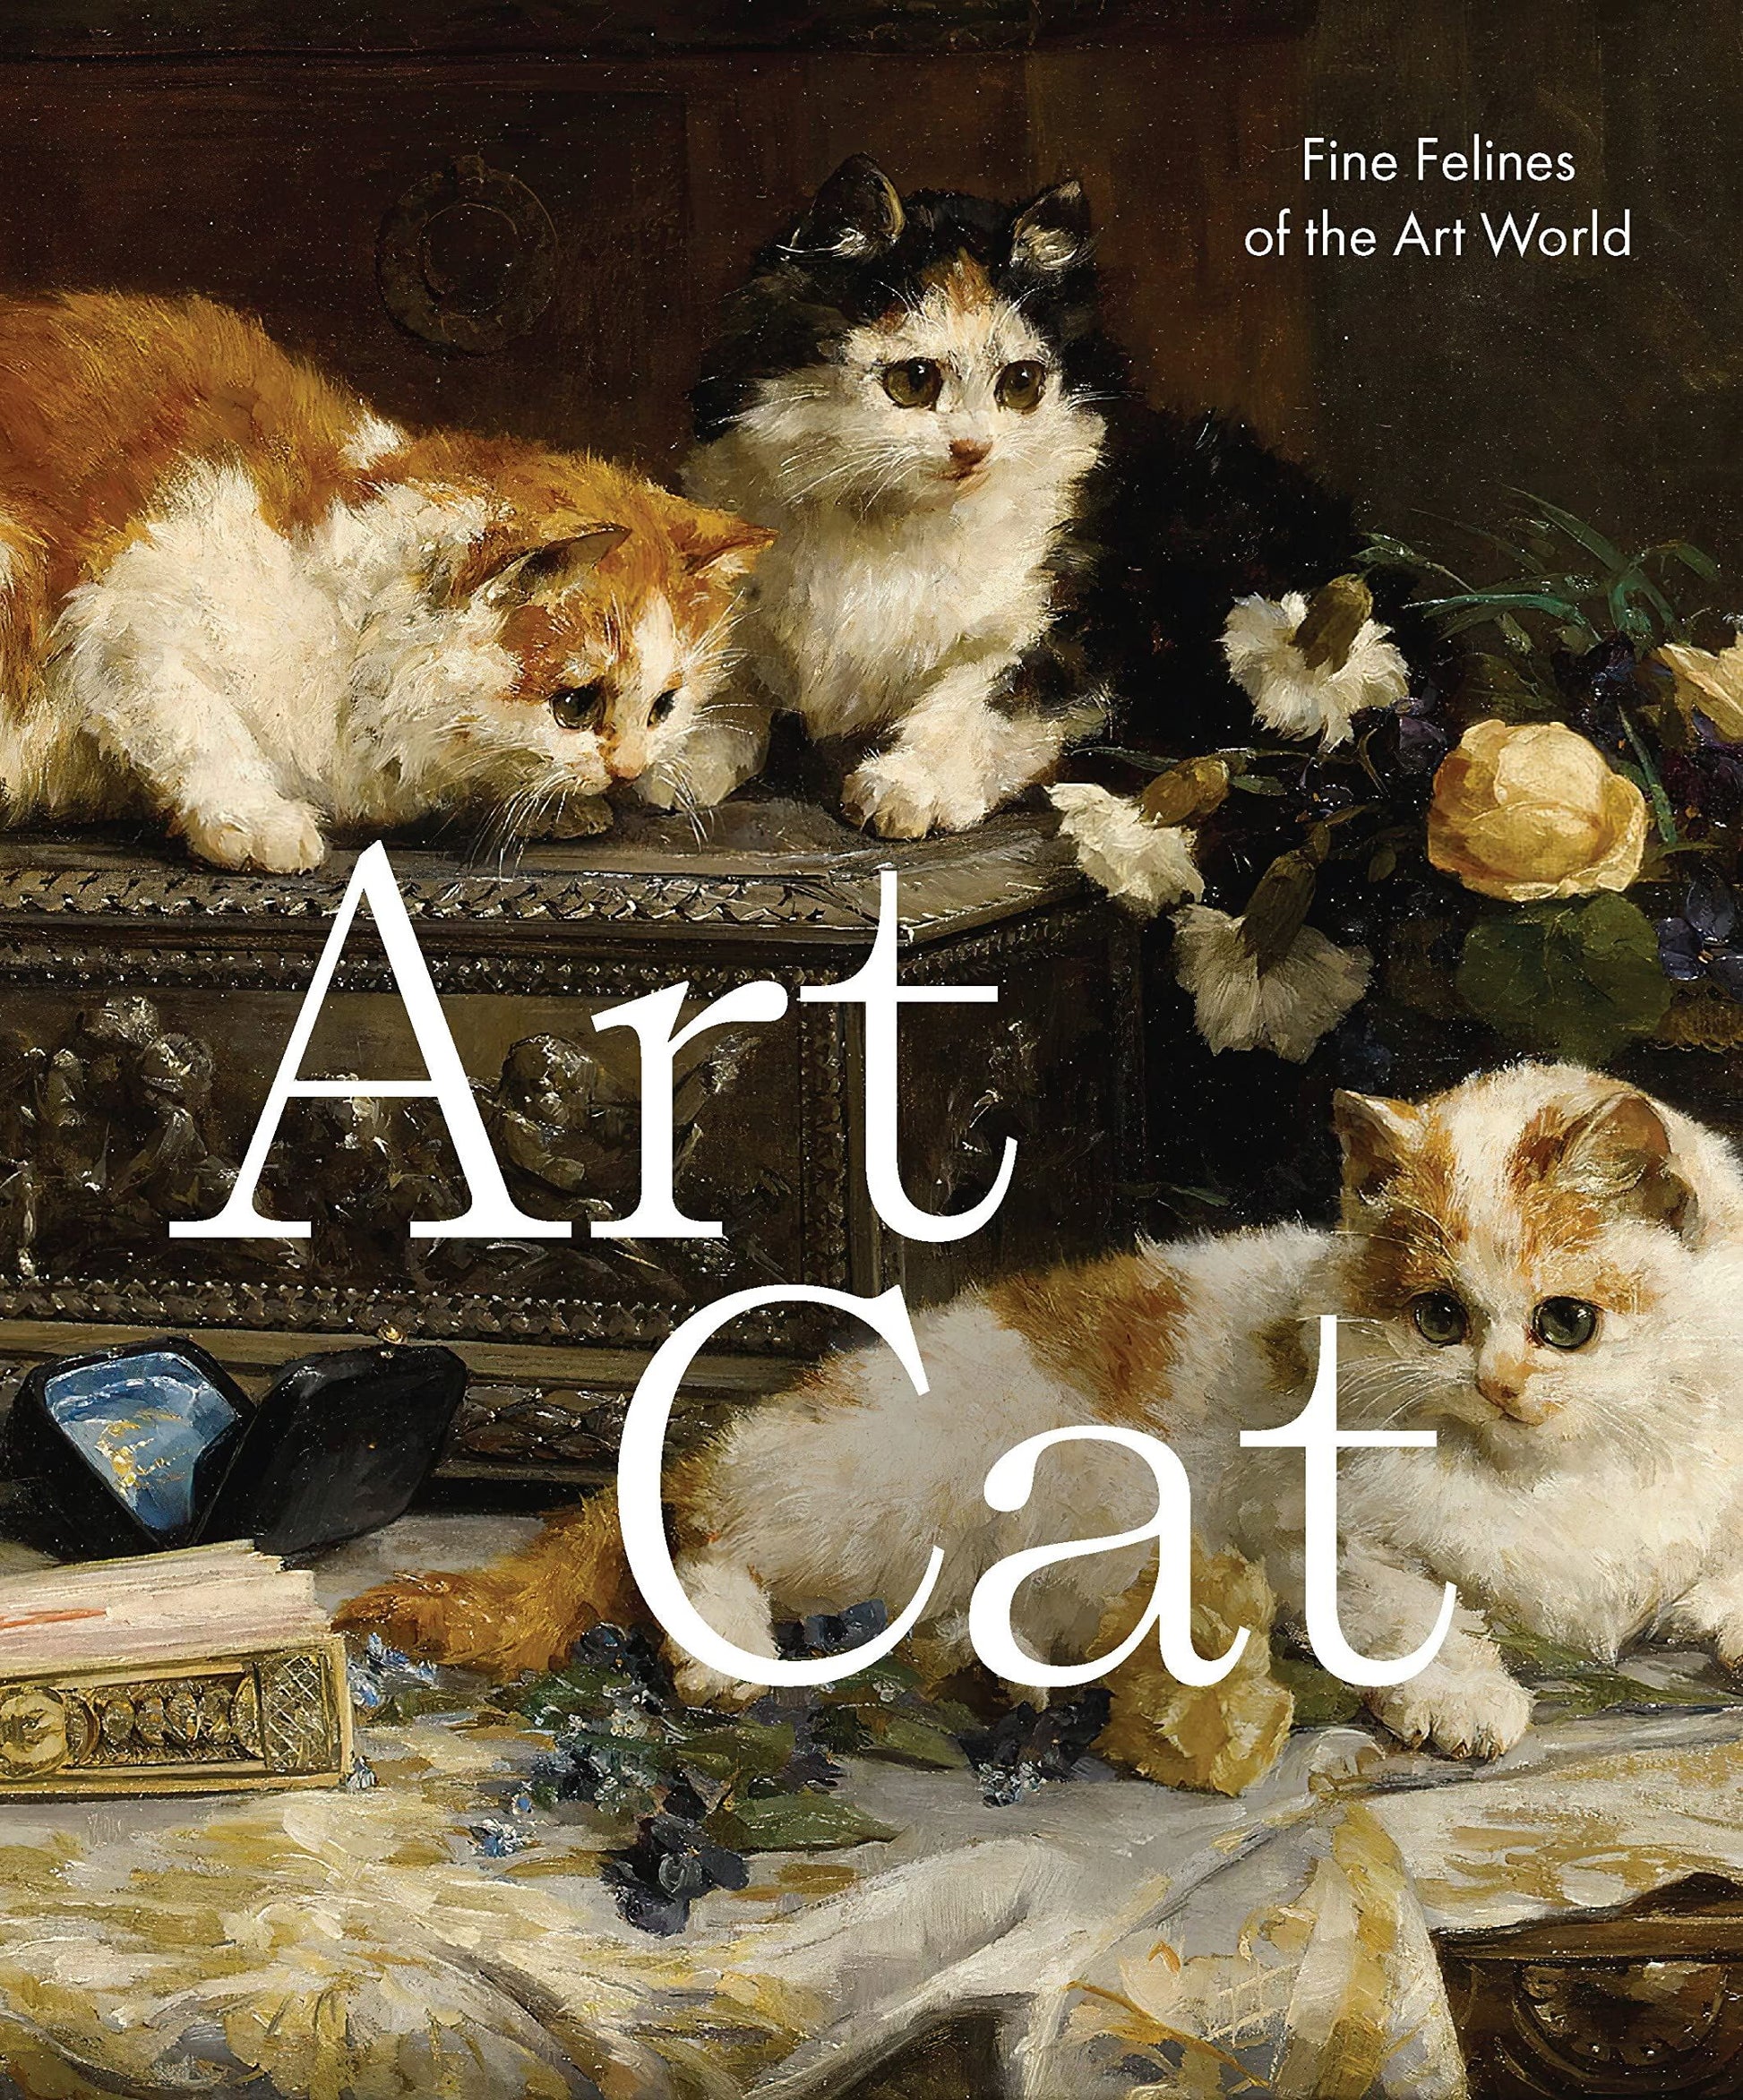 Art cat From the time of the pharaohs to world-famous internet sensations, cats have inspired artists to strive to capture their lithe movements and cryptic personalities for as long as they’ve been our furry companions. This joyous collection celebrates cats in art